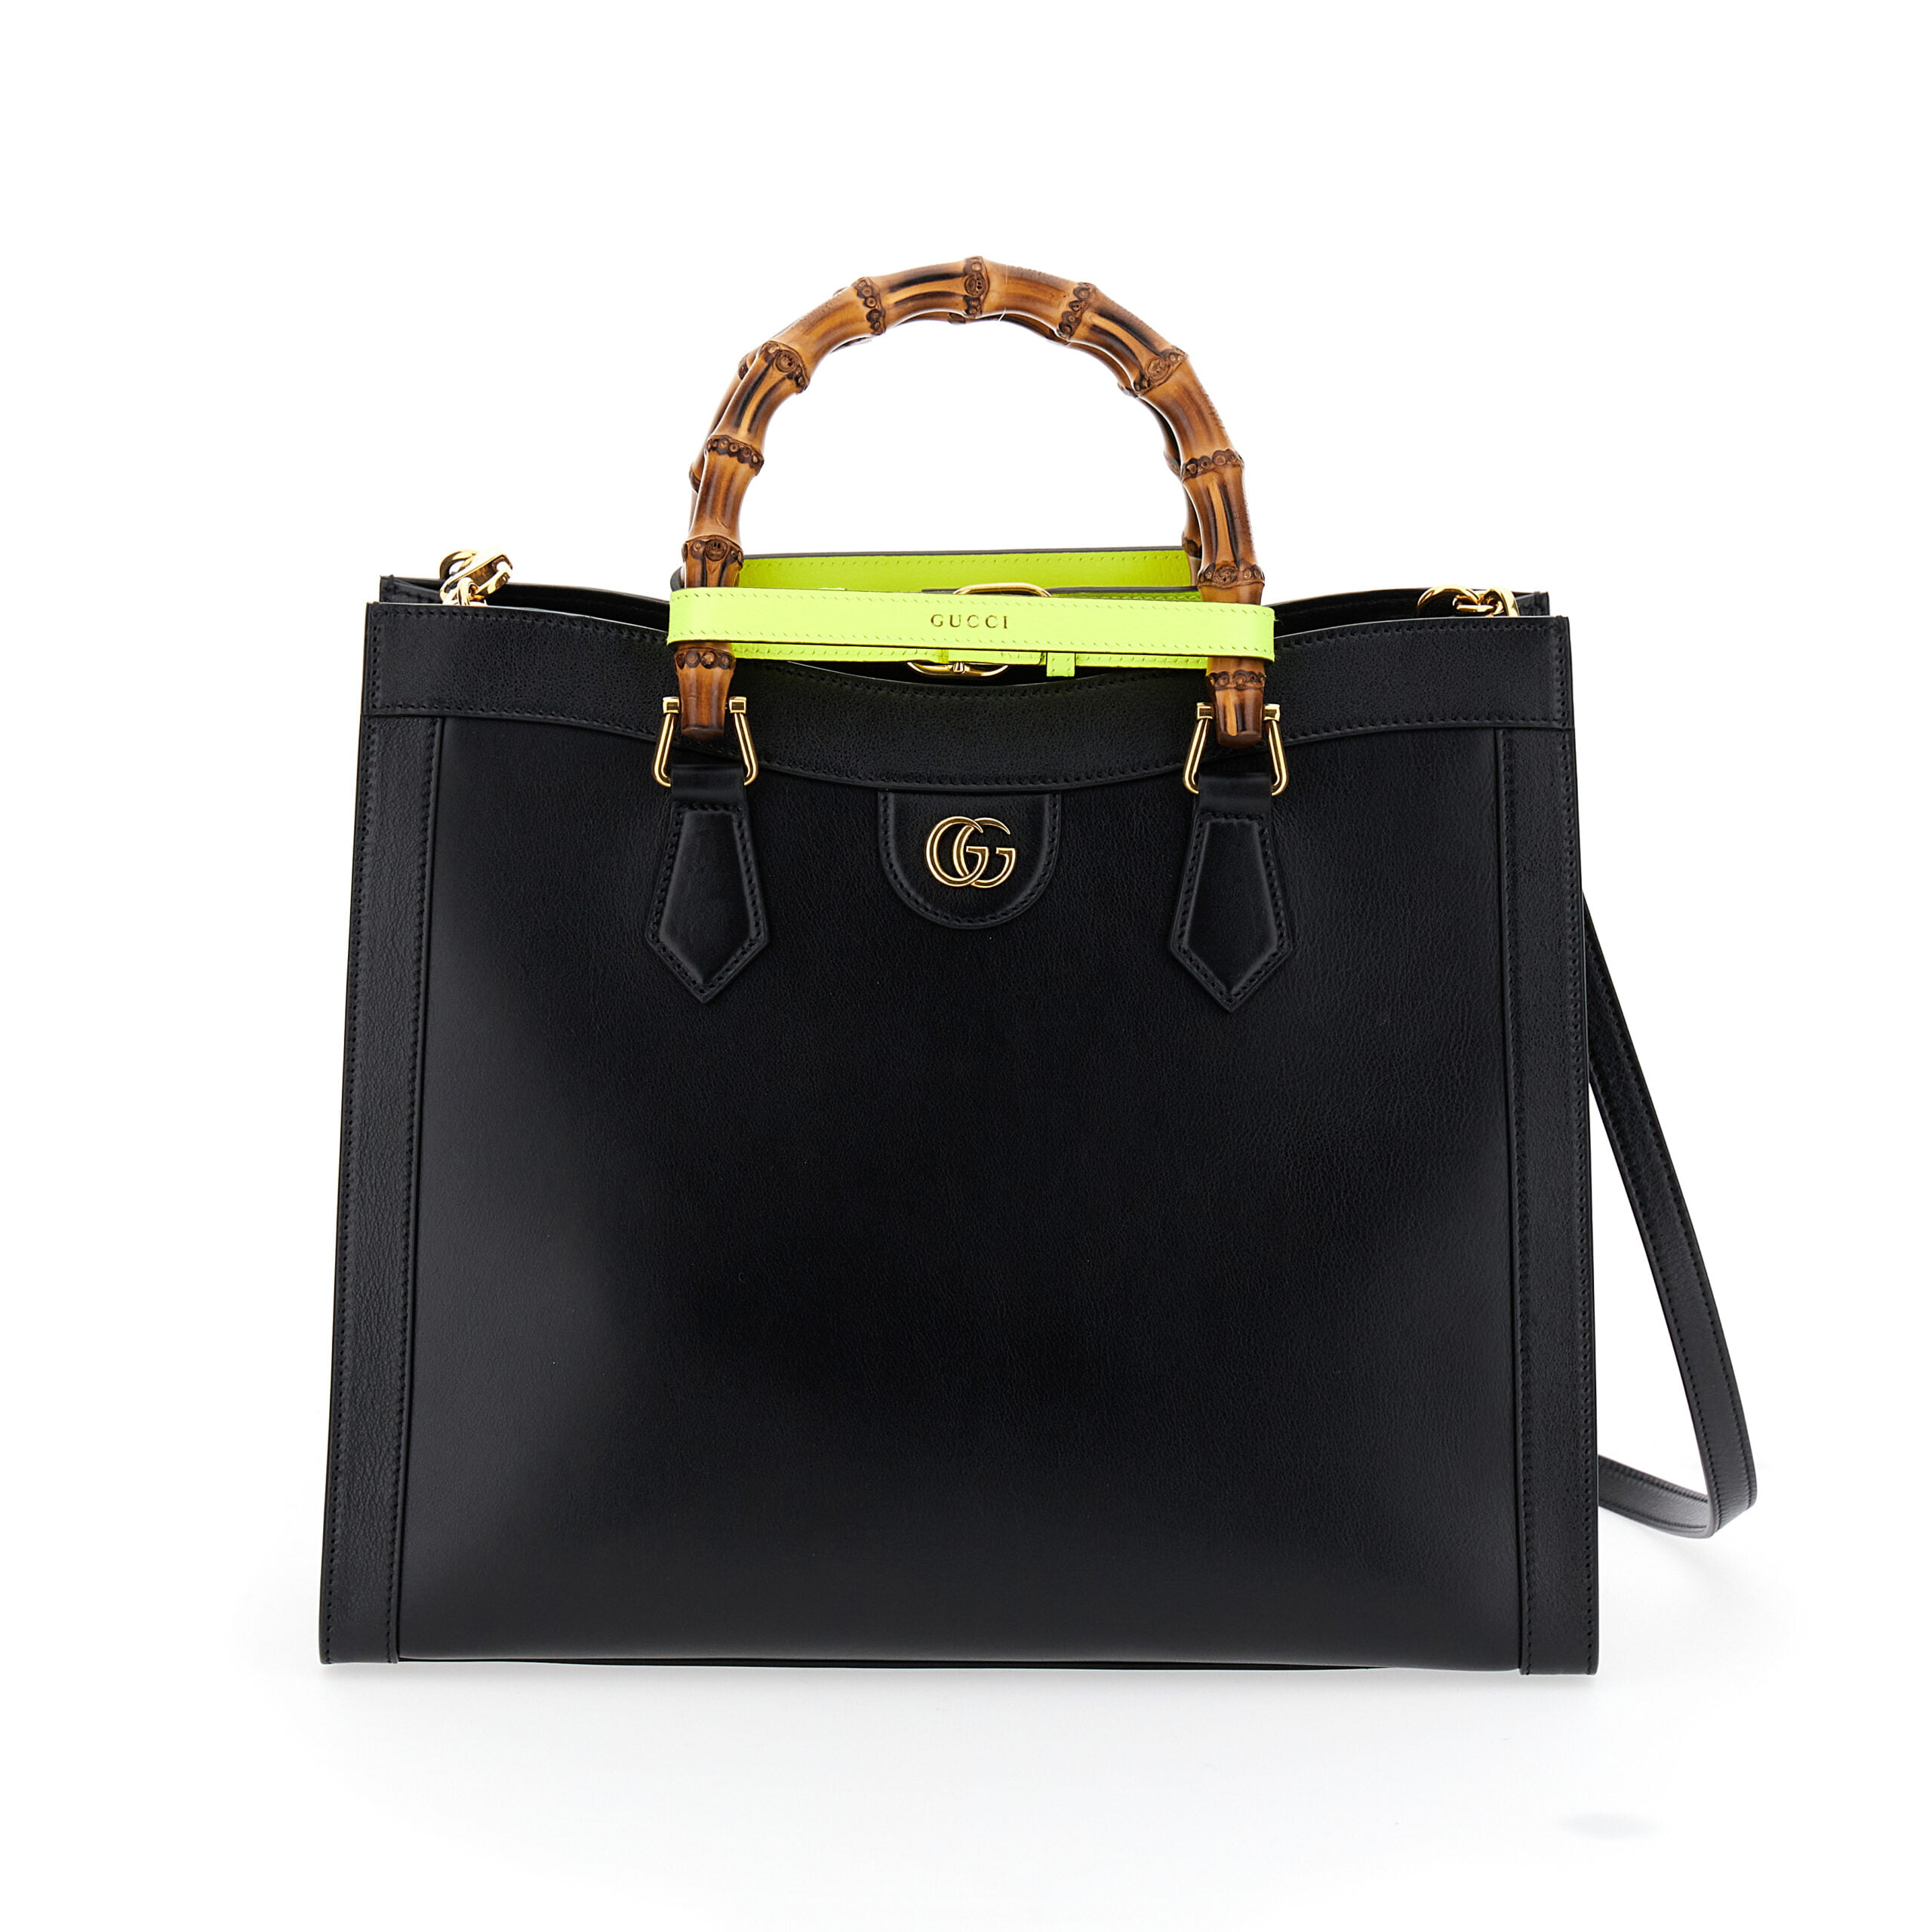 Gucci Diana tote bag image via Rachael Cortese for use by 360 MAGAZINE